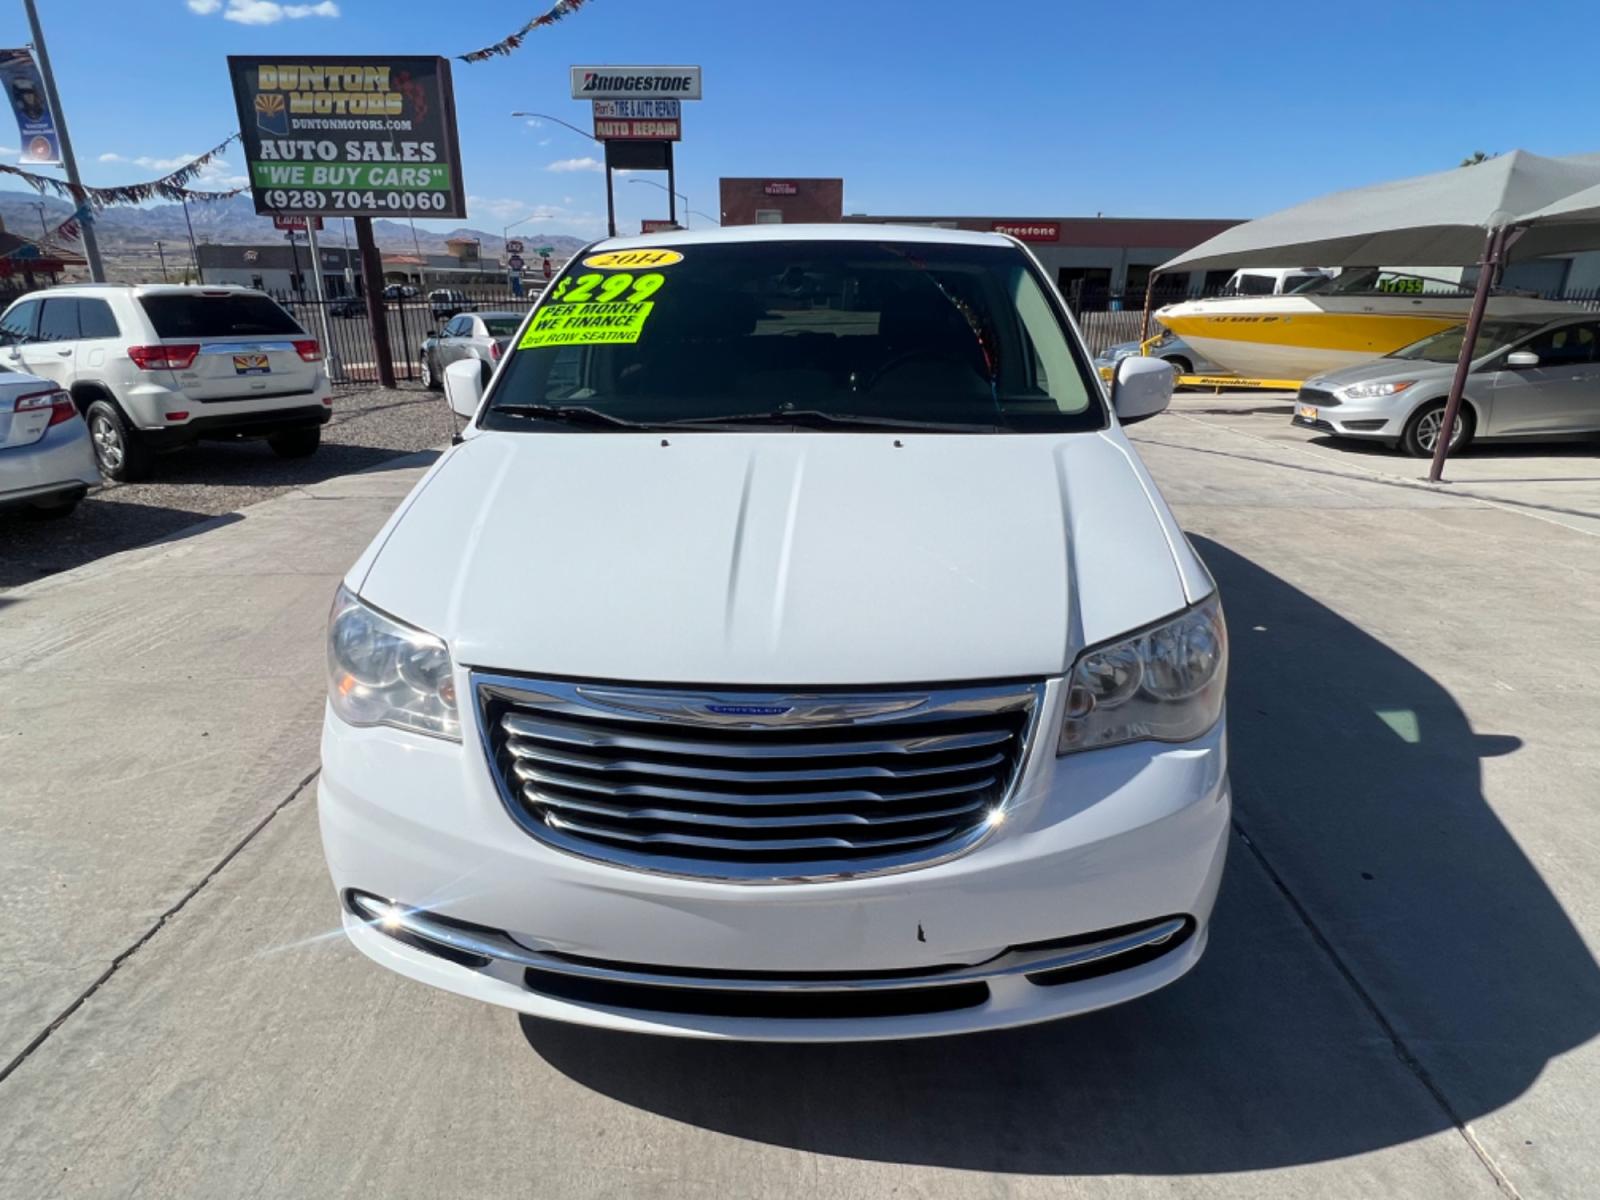 2014 White Chrysler Town and Country , located at 2190 Hwy 95, Bullhead City, AZ, 86442, (928) 704-0060, 0.000000, 0.000000 - 2014 Chryslter Town and Country Touring. Completely serviced. Runs and drives great. Free warranty. Free carfax. seats 7. bluetooth, backup camera, leather interior. fully loaded. power electric doors. keyless entry. stow and go seating v6 engine. This van has it all. IN house financing available. - Photo #2